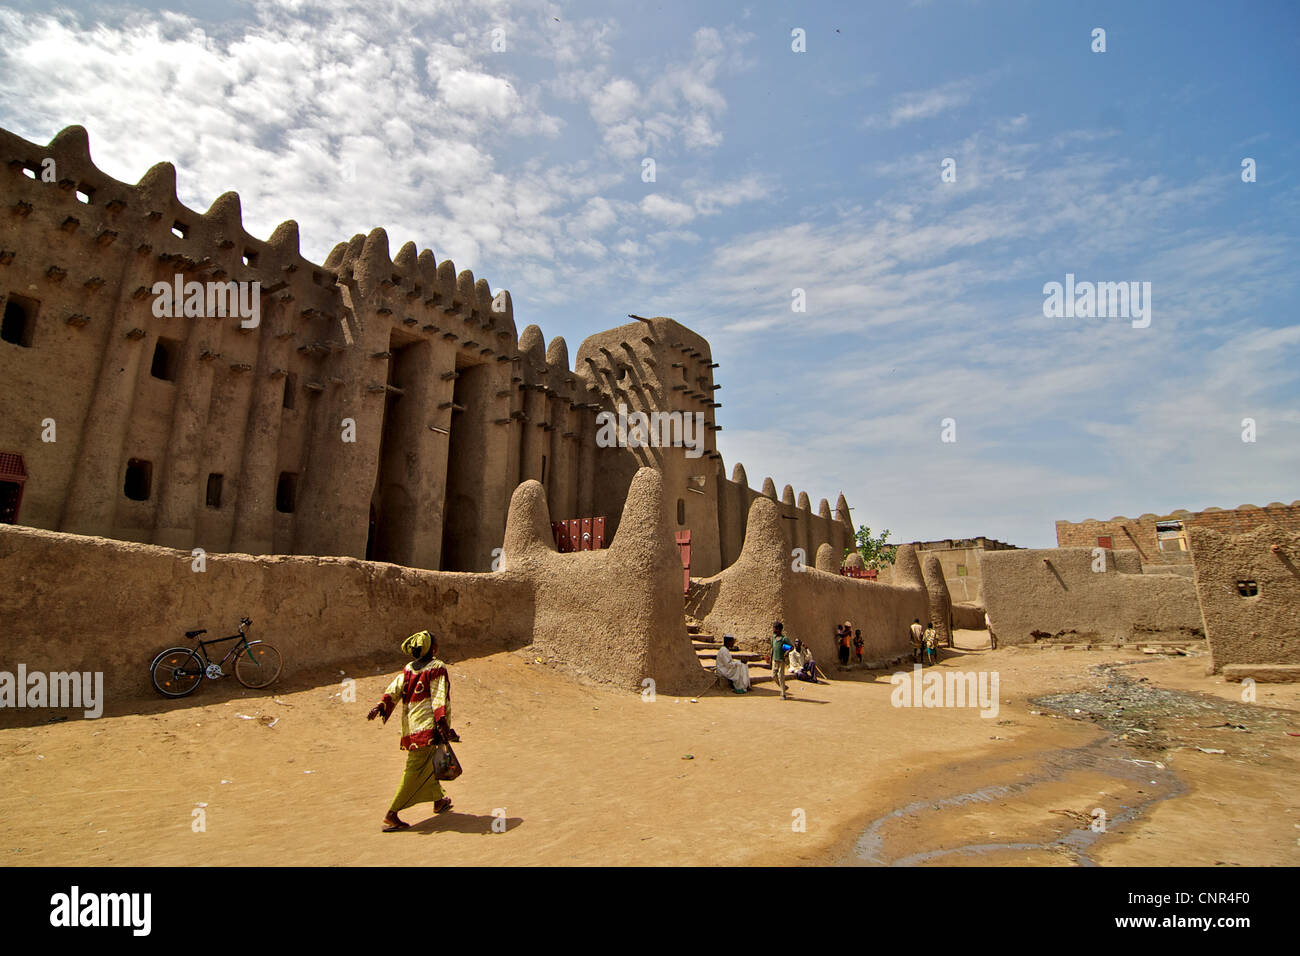 People resting in the shade of the Great Mosque of Djenne in Djenne, Mali. Stock Photo